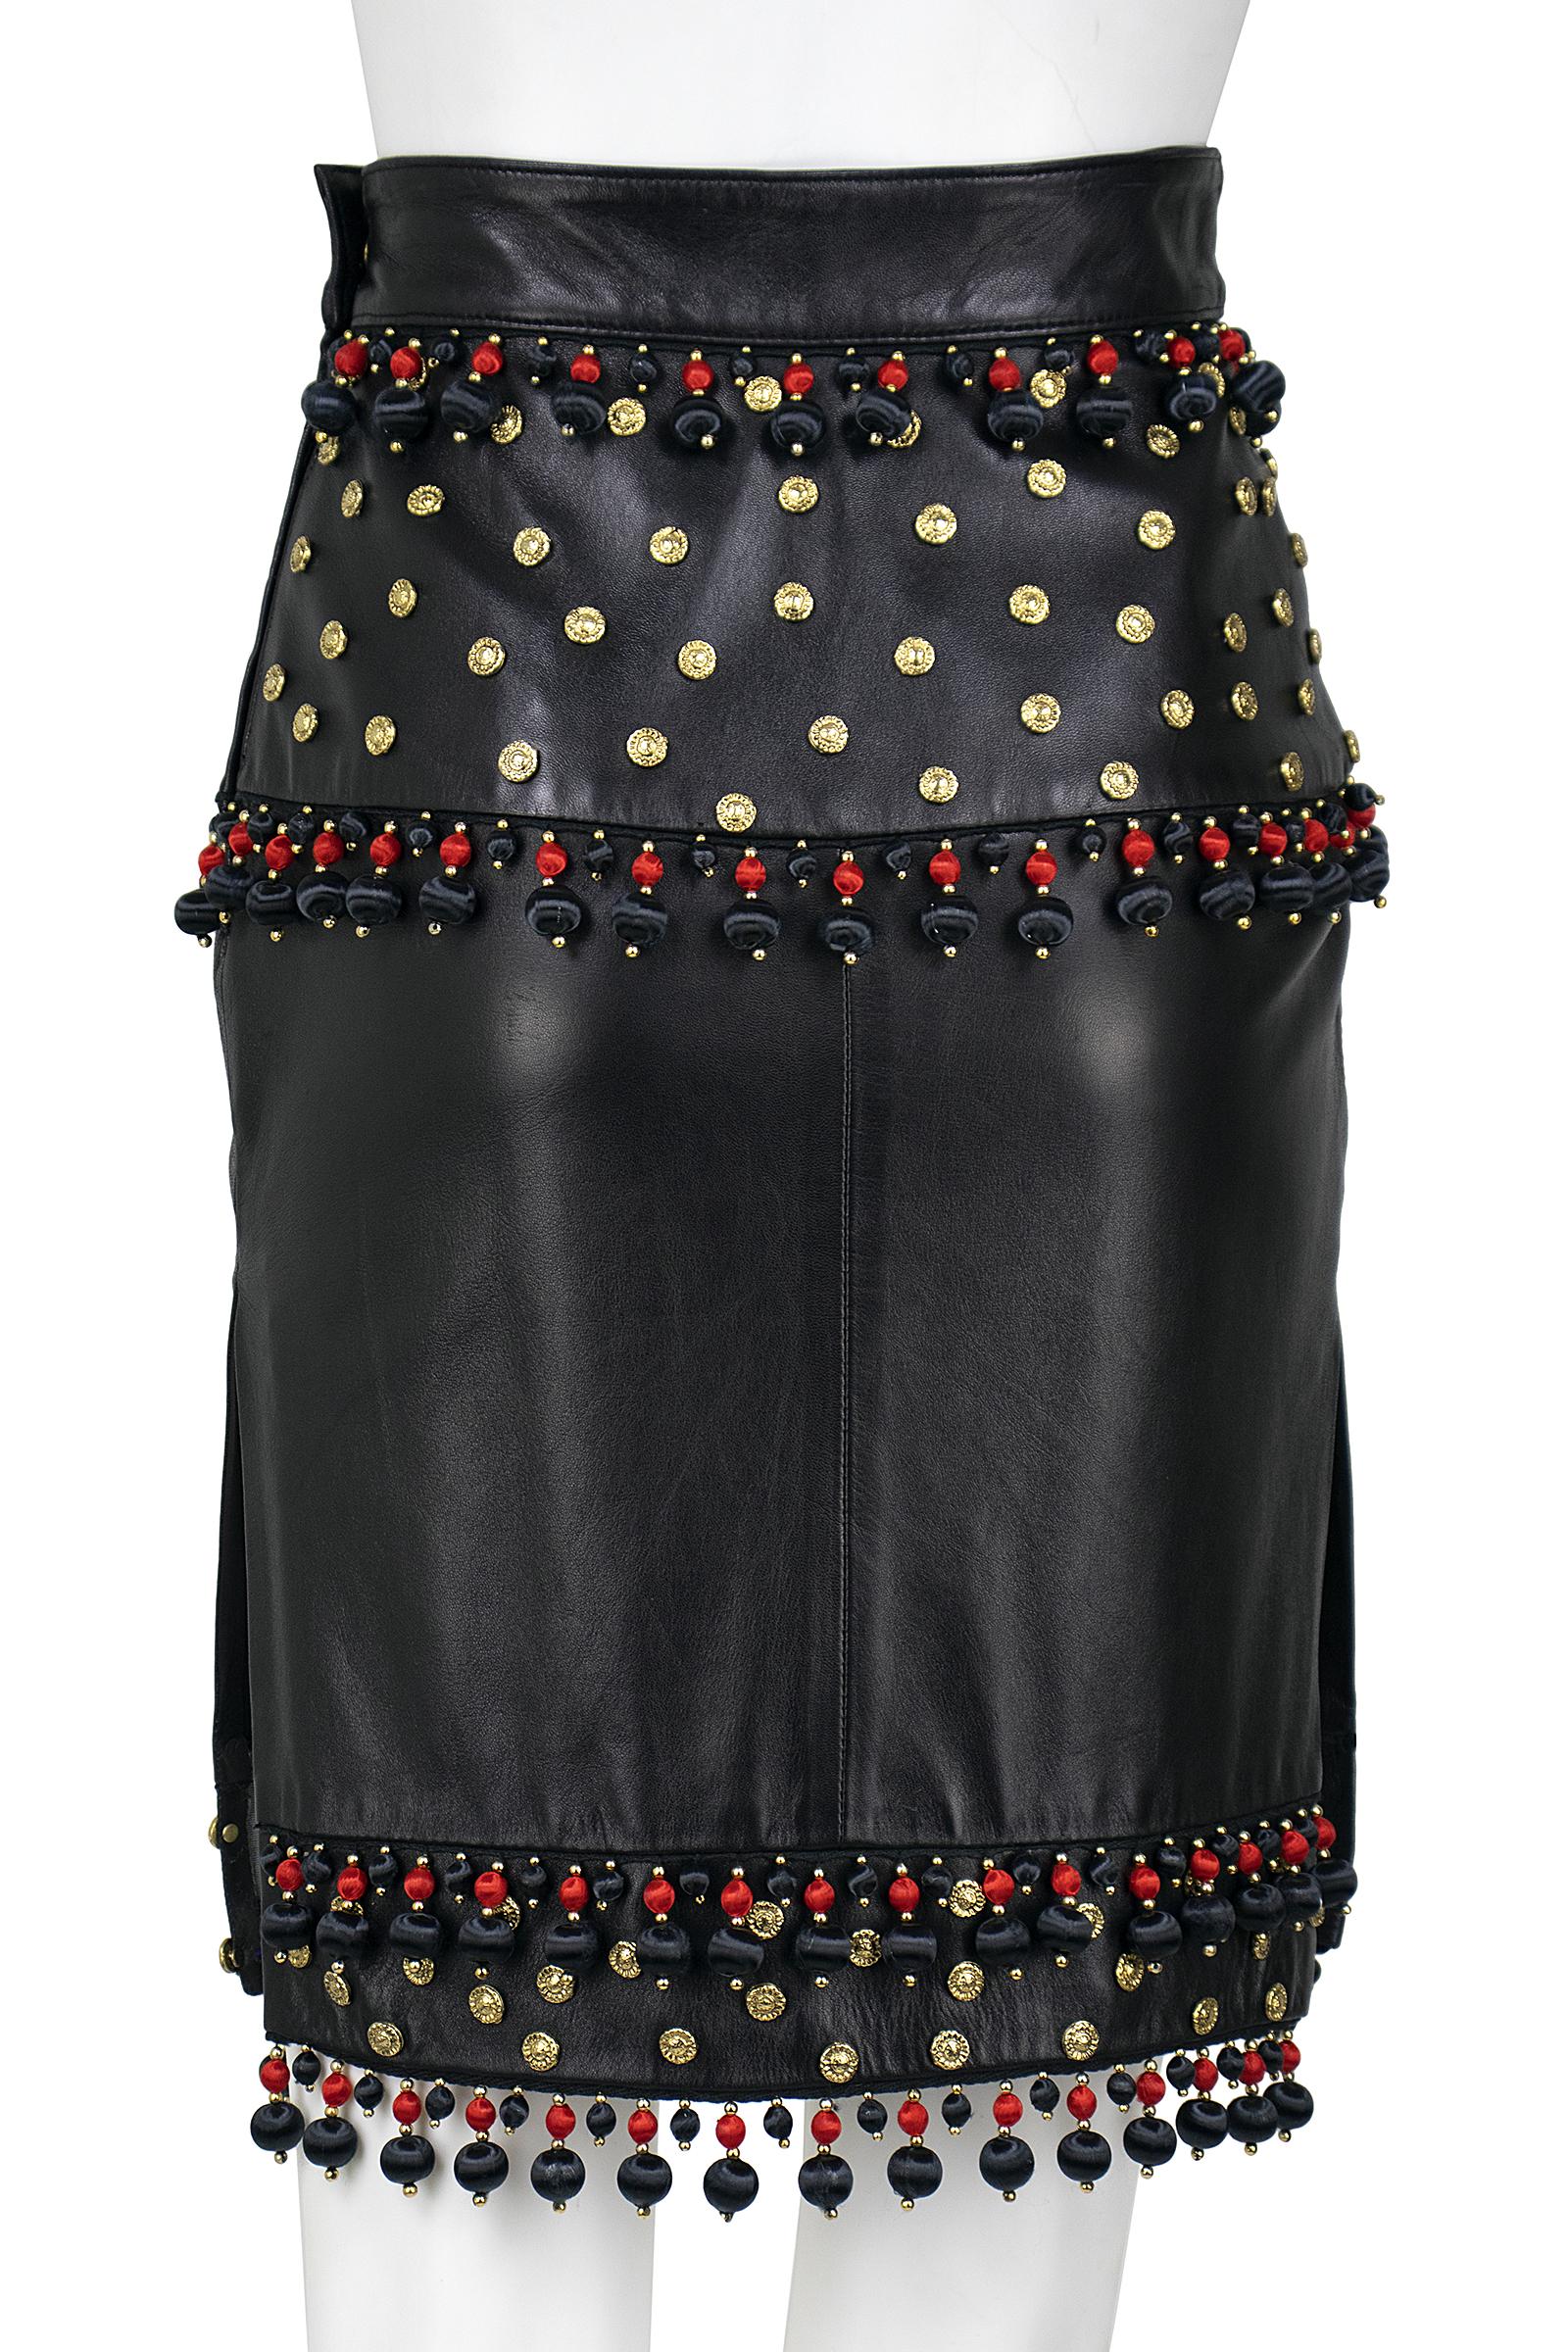 Moschino Circa 1990s Black Leather Skirt with Tassels, Metal Studs and Flowers In Good Condition For Sale In Los Angeles, CA